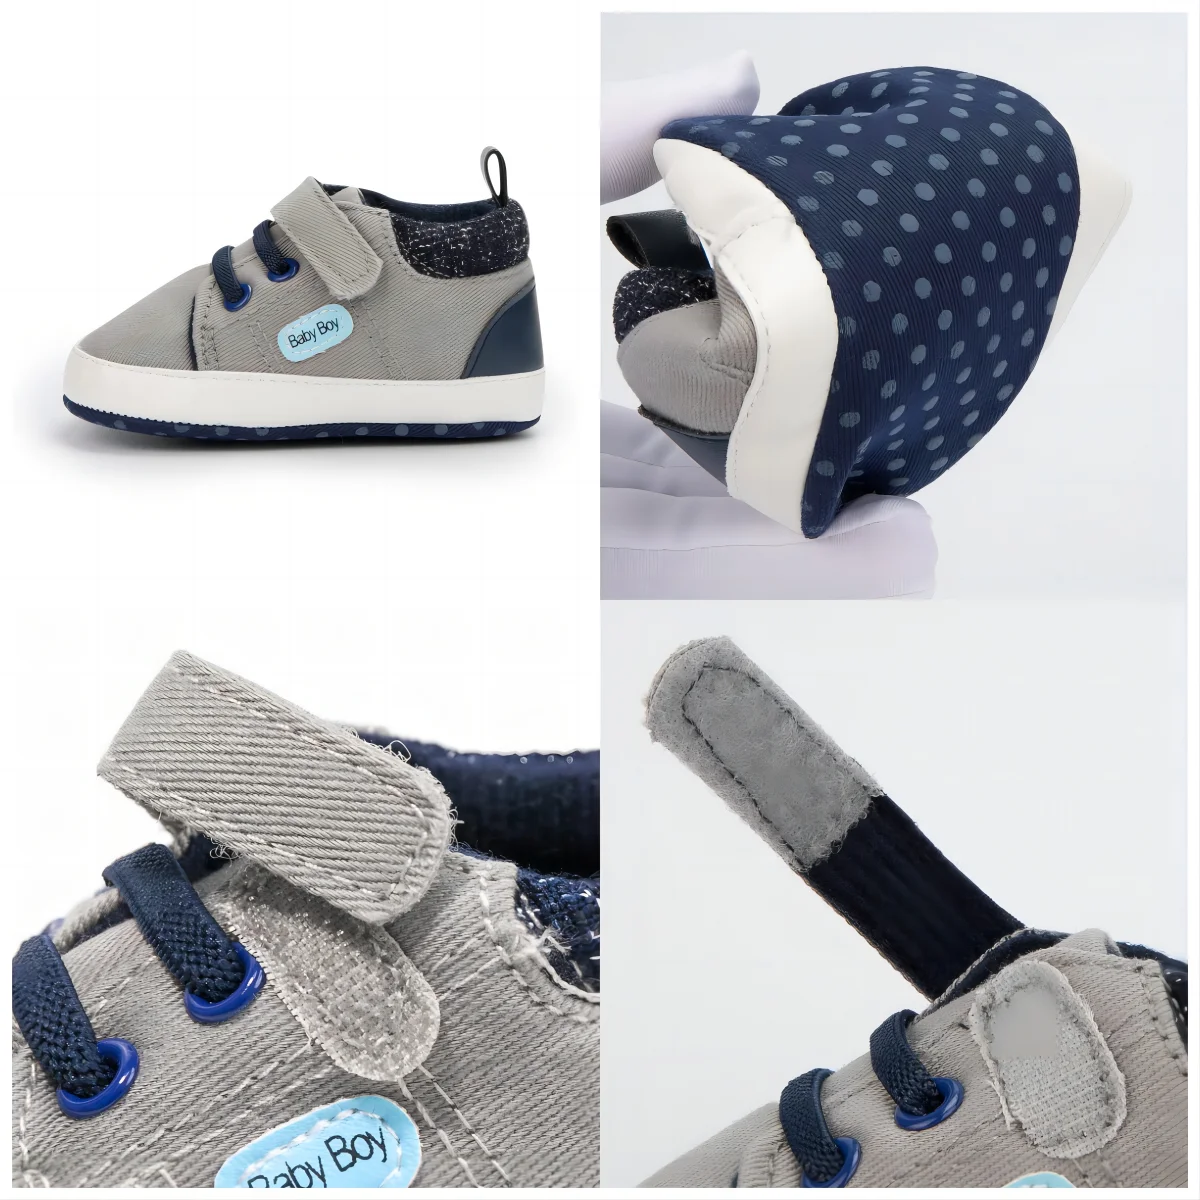 Hot Selling Newborn Cheap Cotton Soft Sole Breathable 0 18 Months Cool Baby Boy Sneakers Shoes Leather Upper Walking Shoes